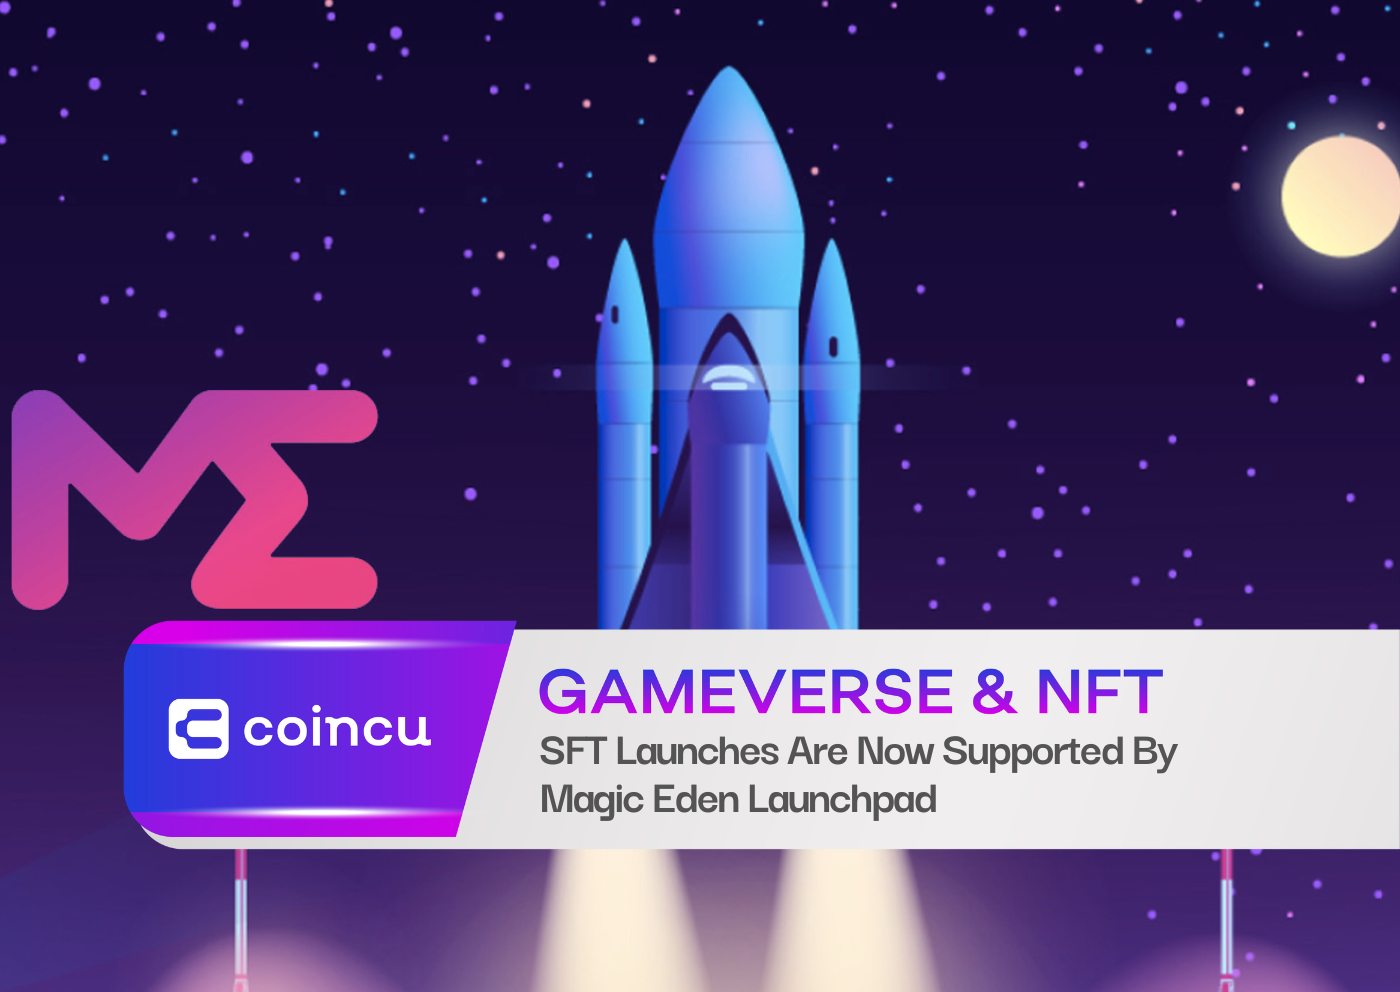 SFT Launches Are Now Supported By Magic Eden Launchpad